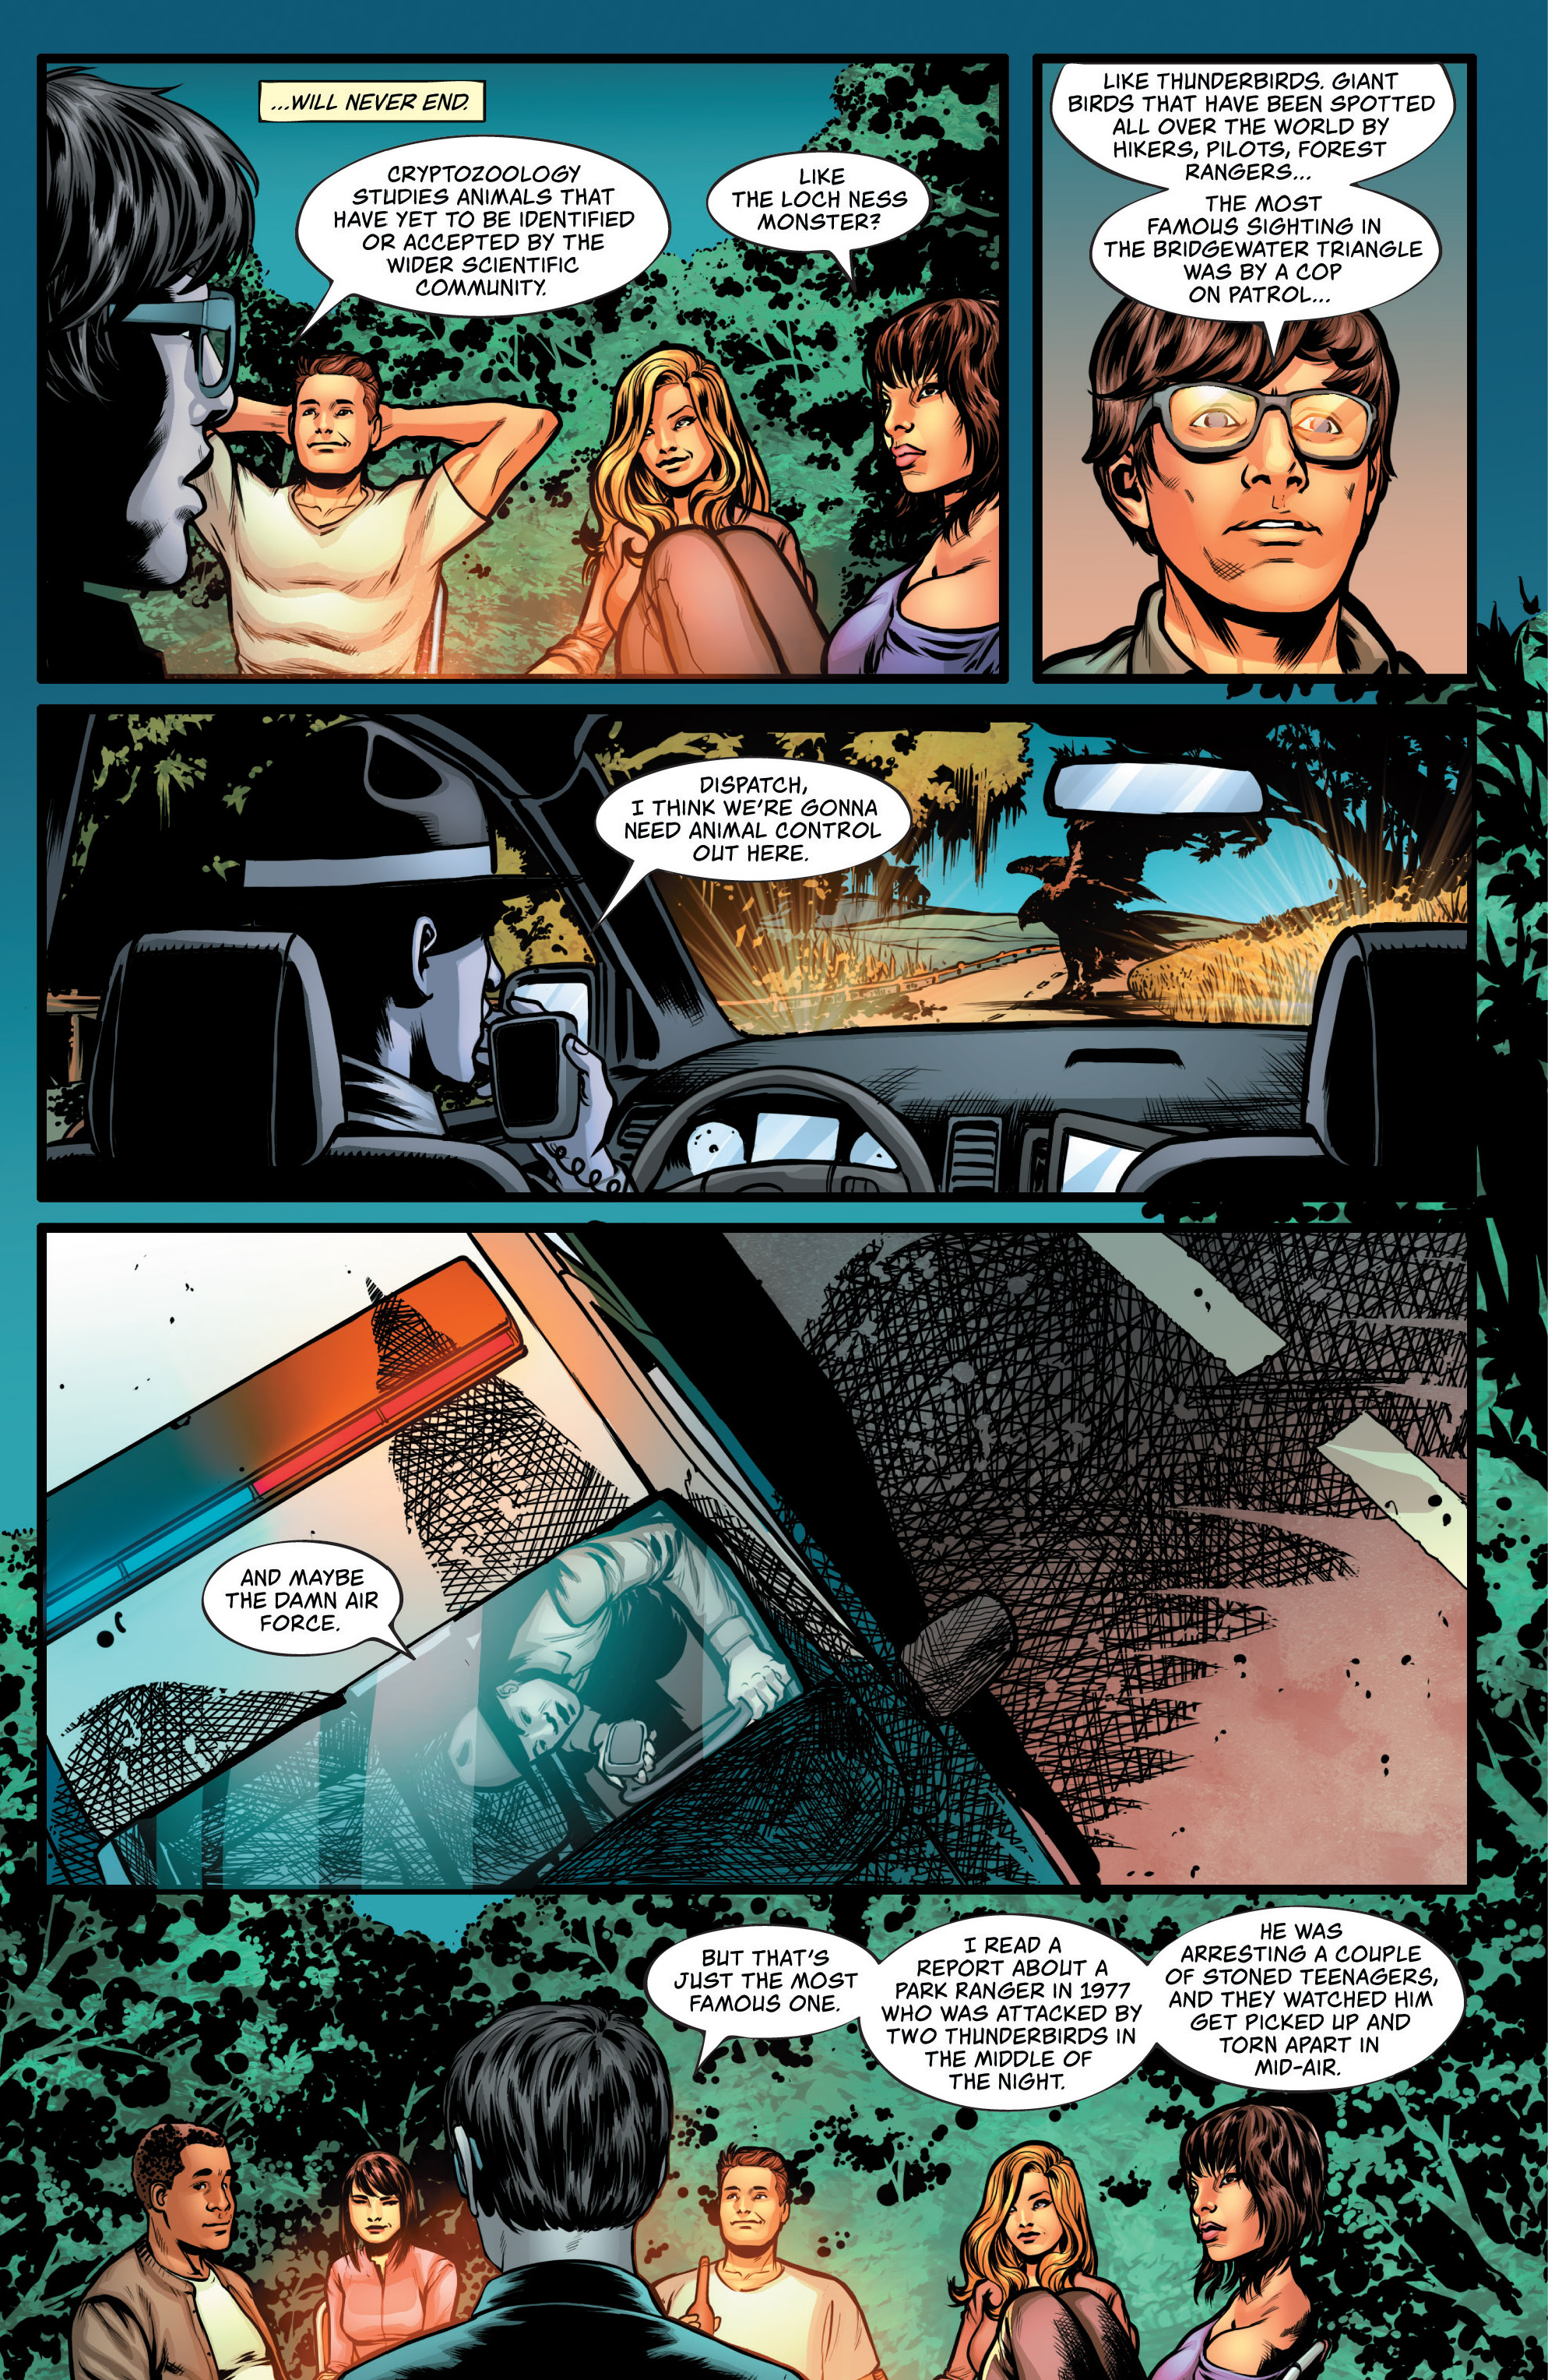 Grimm Tales of Terror: The Bridgewater Triangle (2019-): Chapter 3 - Page 4